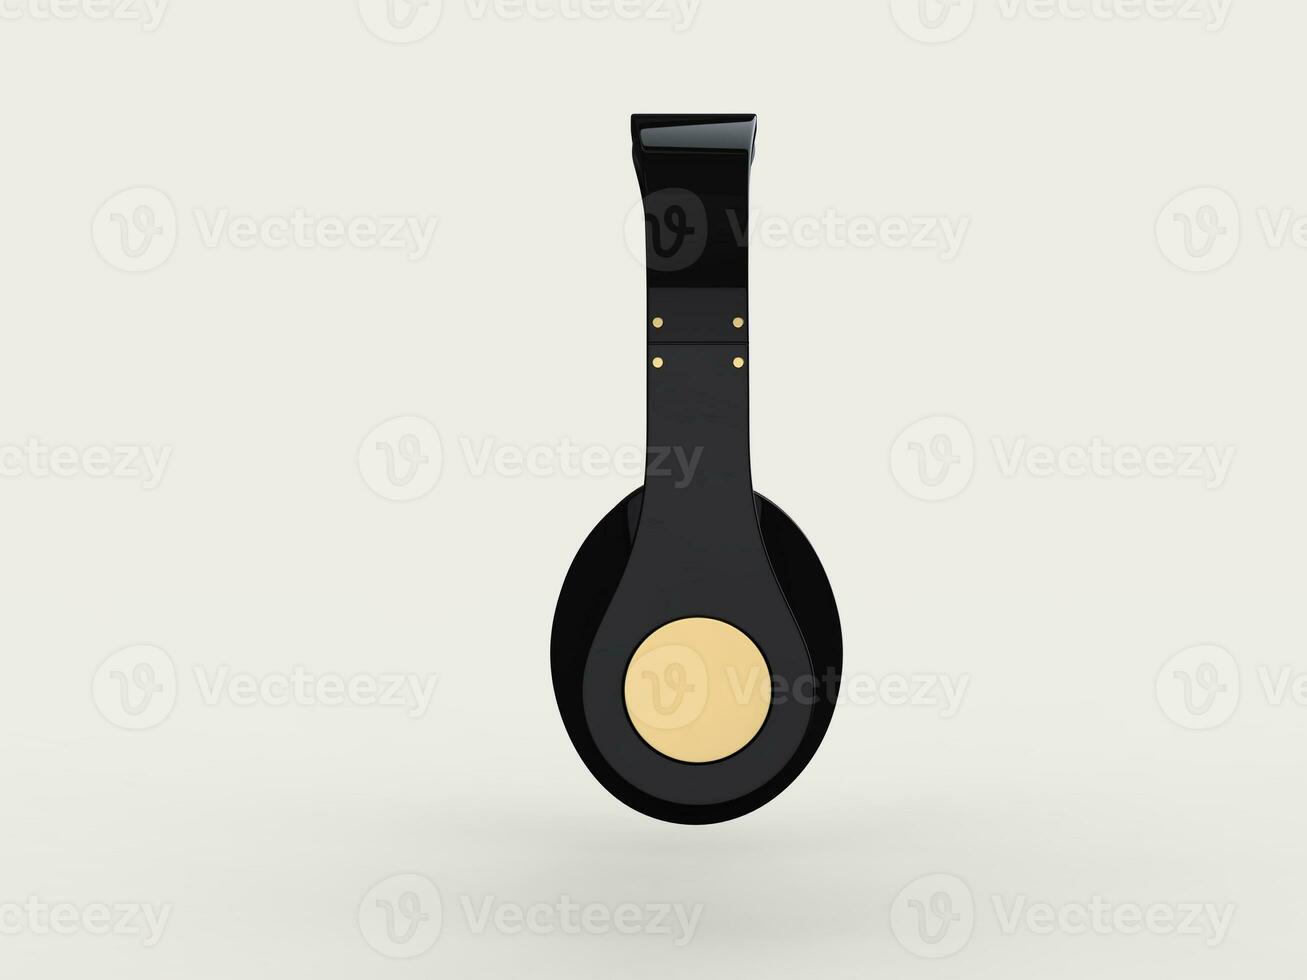 Shiny new black wireless headphones with gold details - side view photo